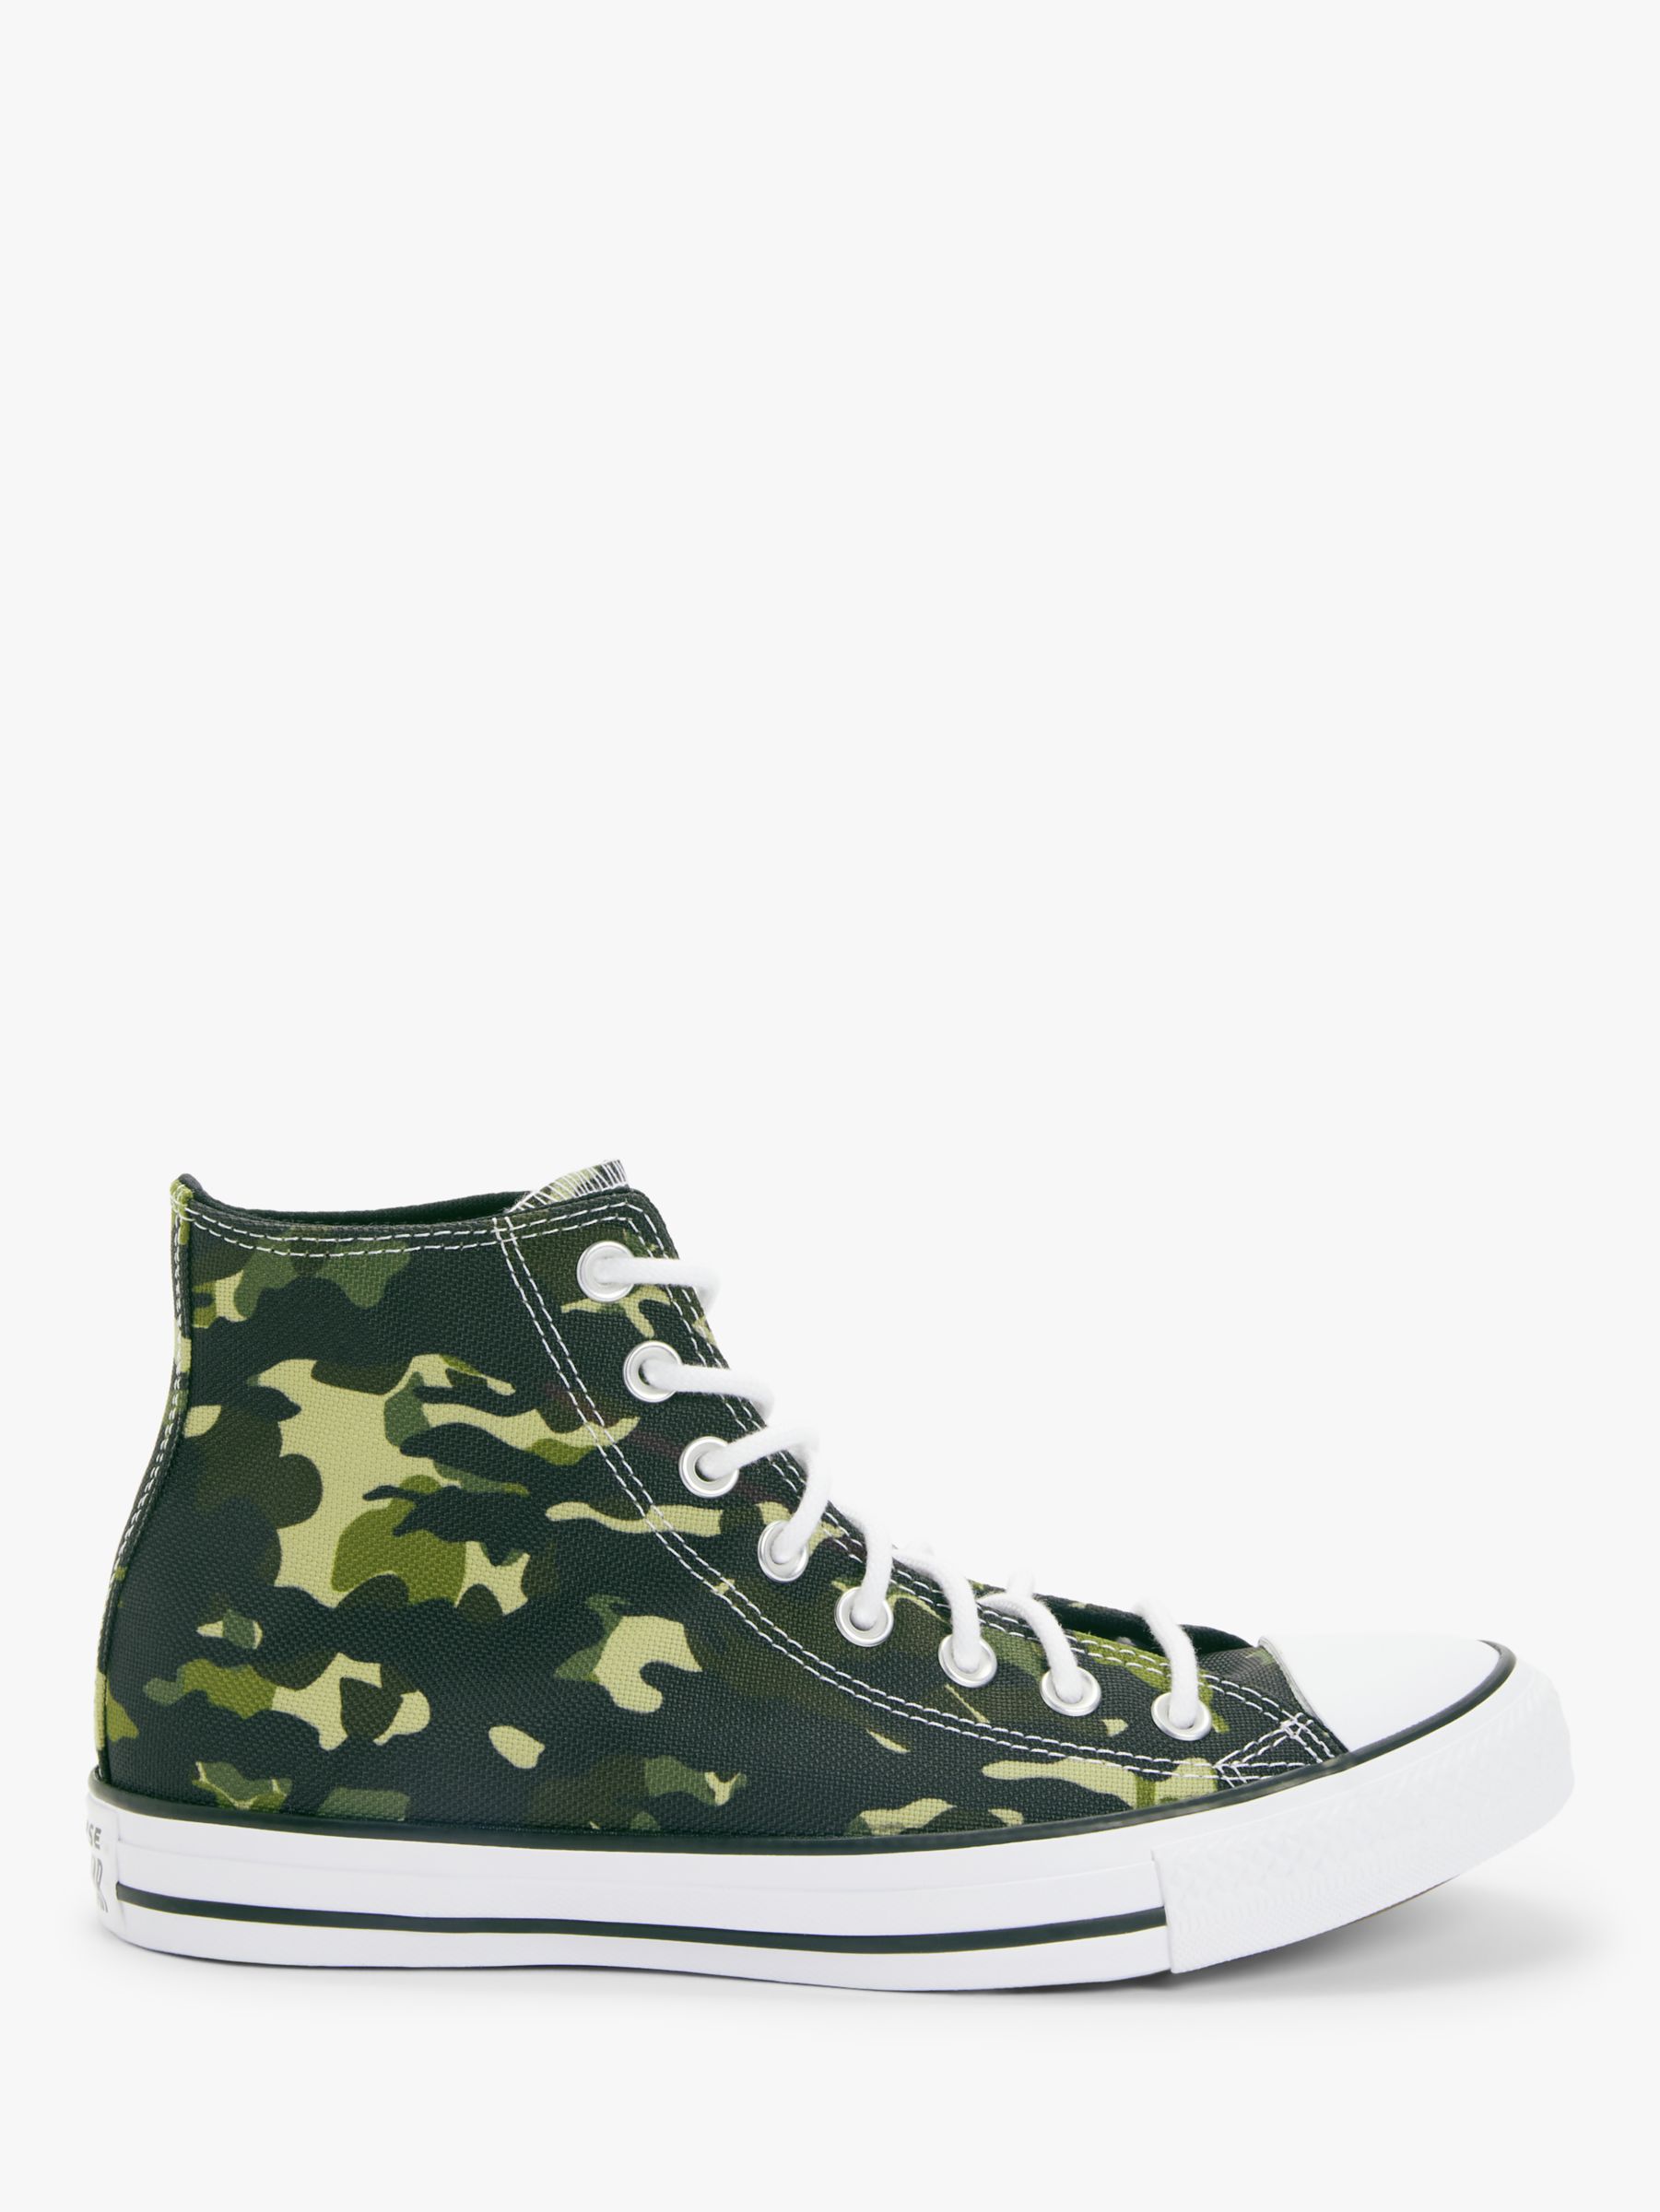 Converse Allover Camo Chuck Taylor All Star High Top Trainers, Green